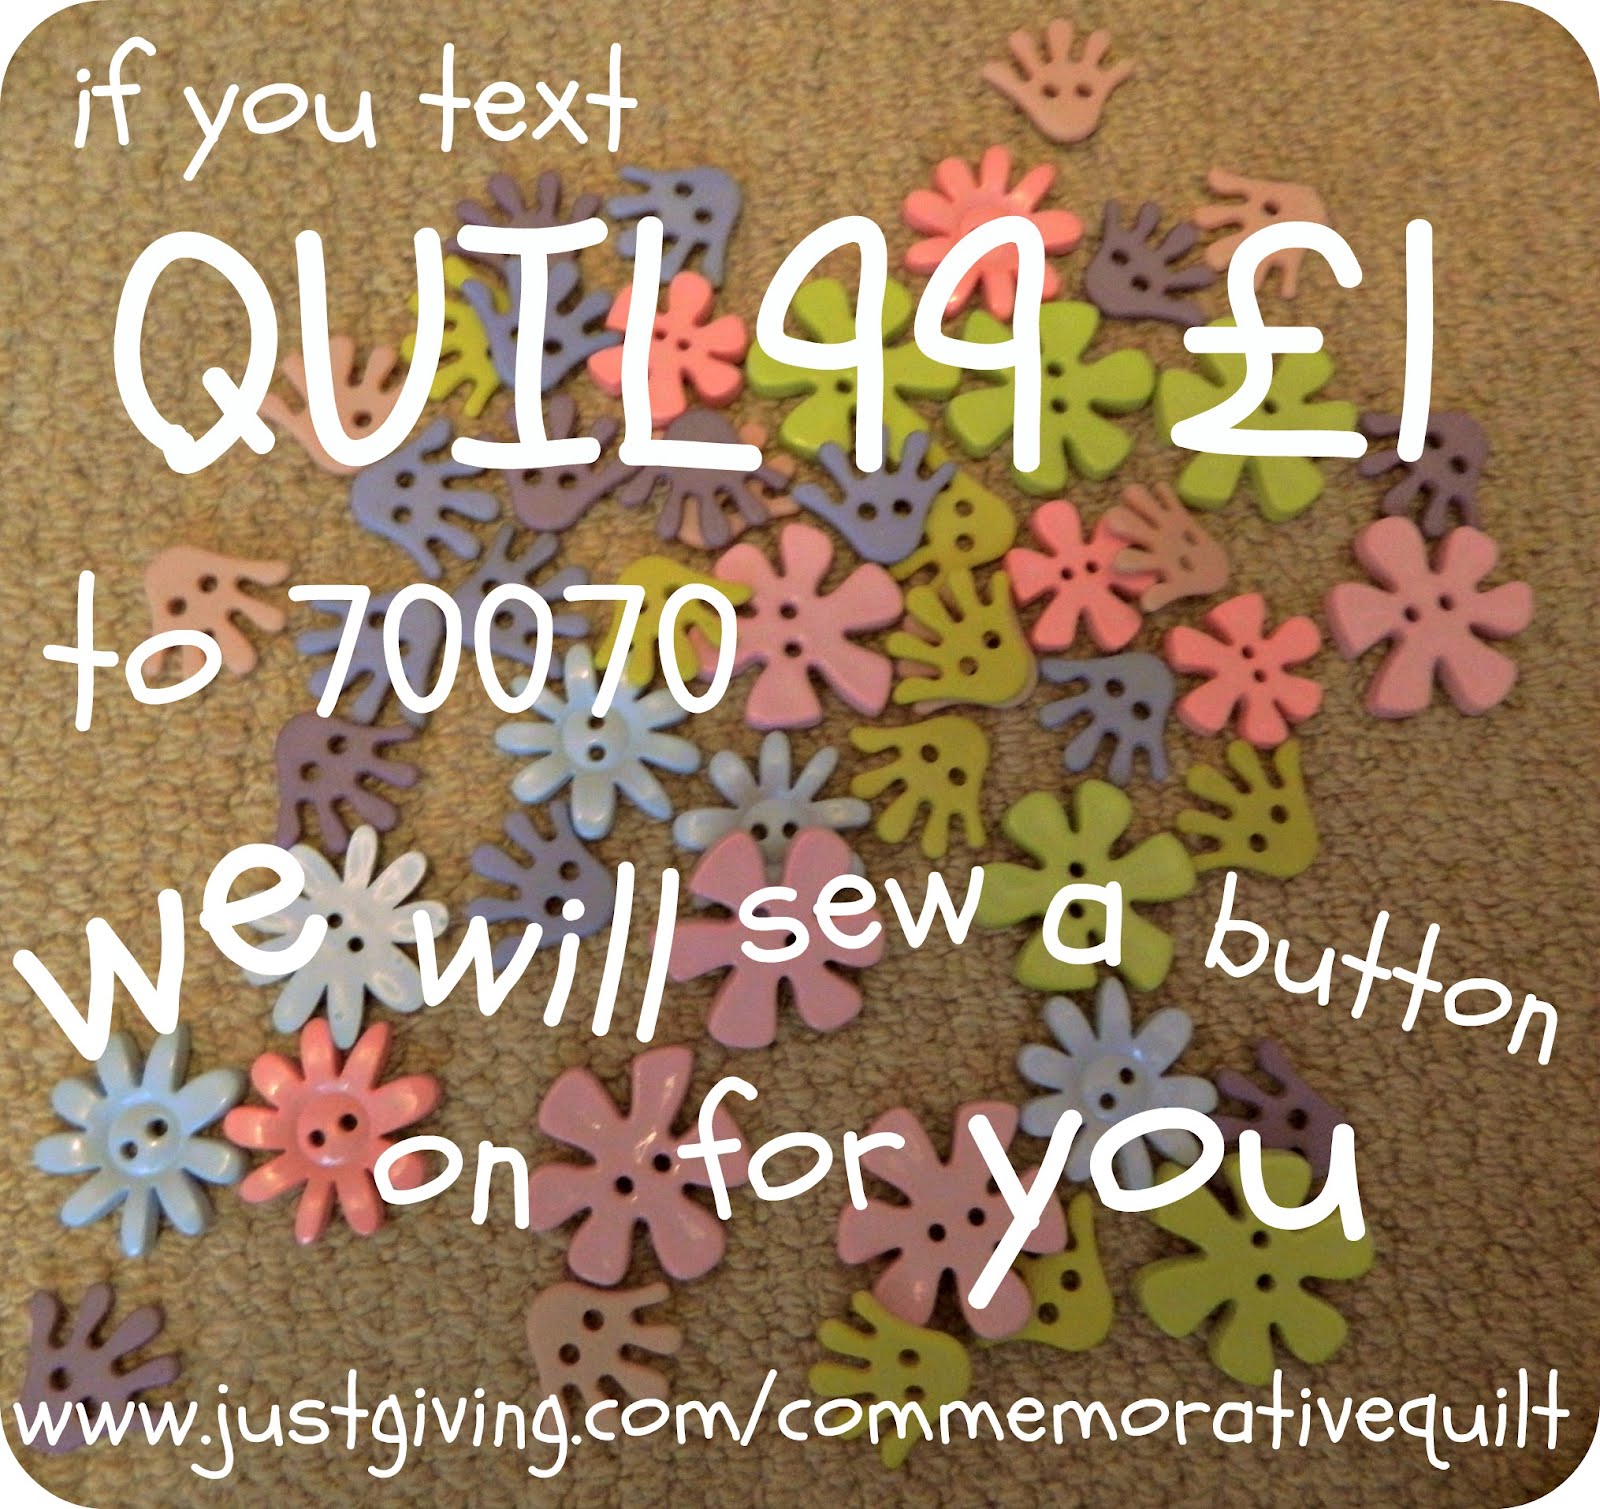 Give us a Helping Hand for  £1 and sponsor a button on the Special Care quilt!